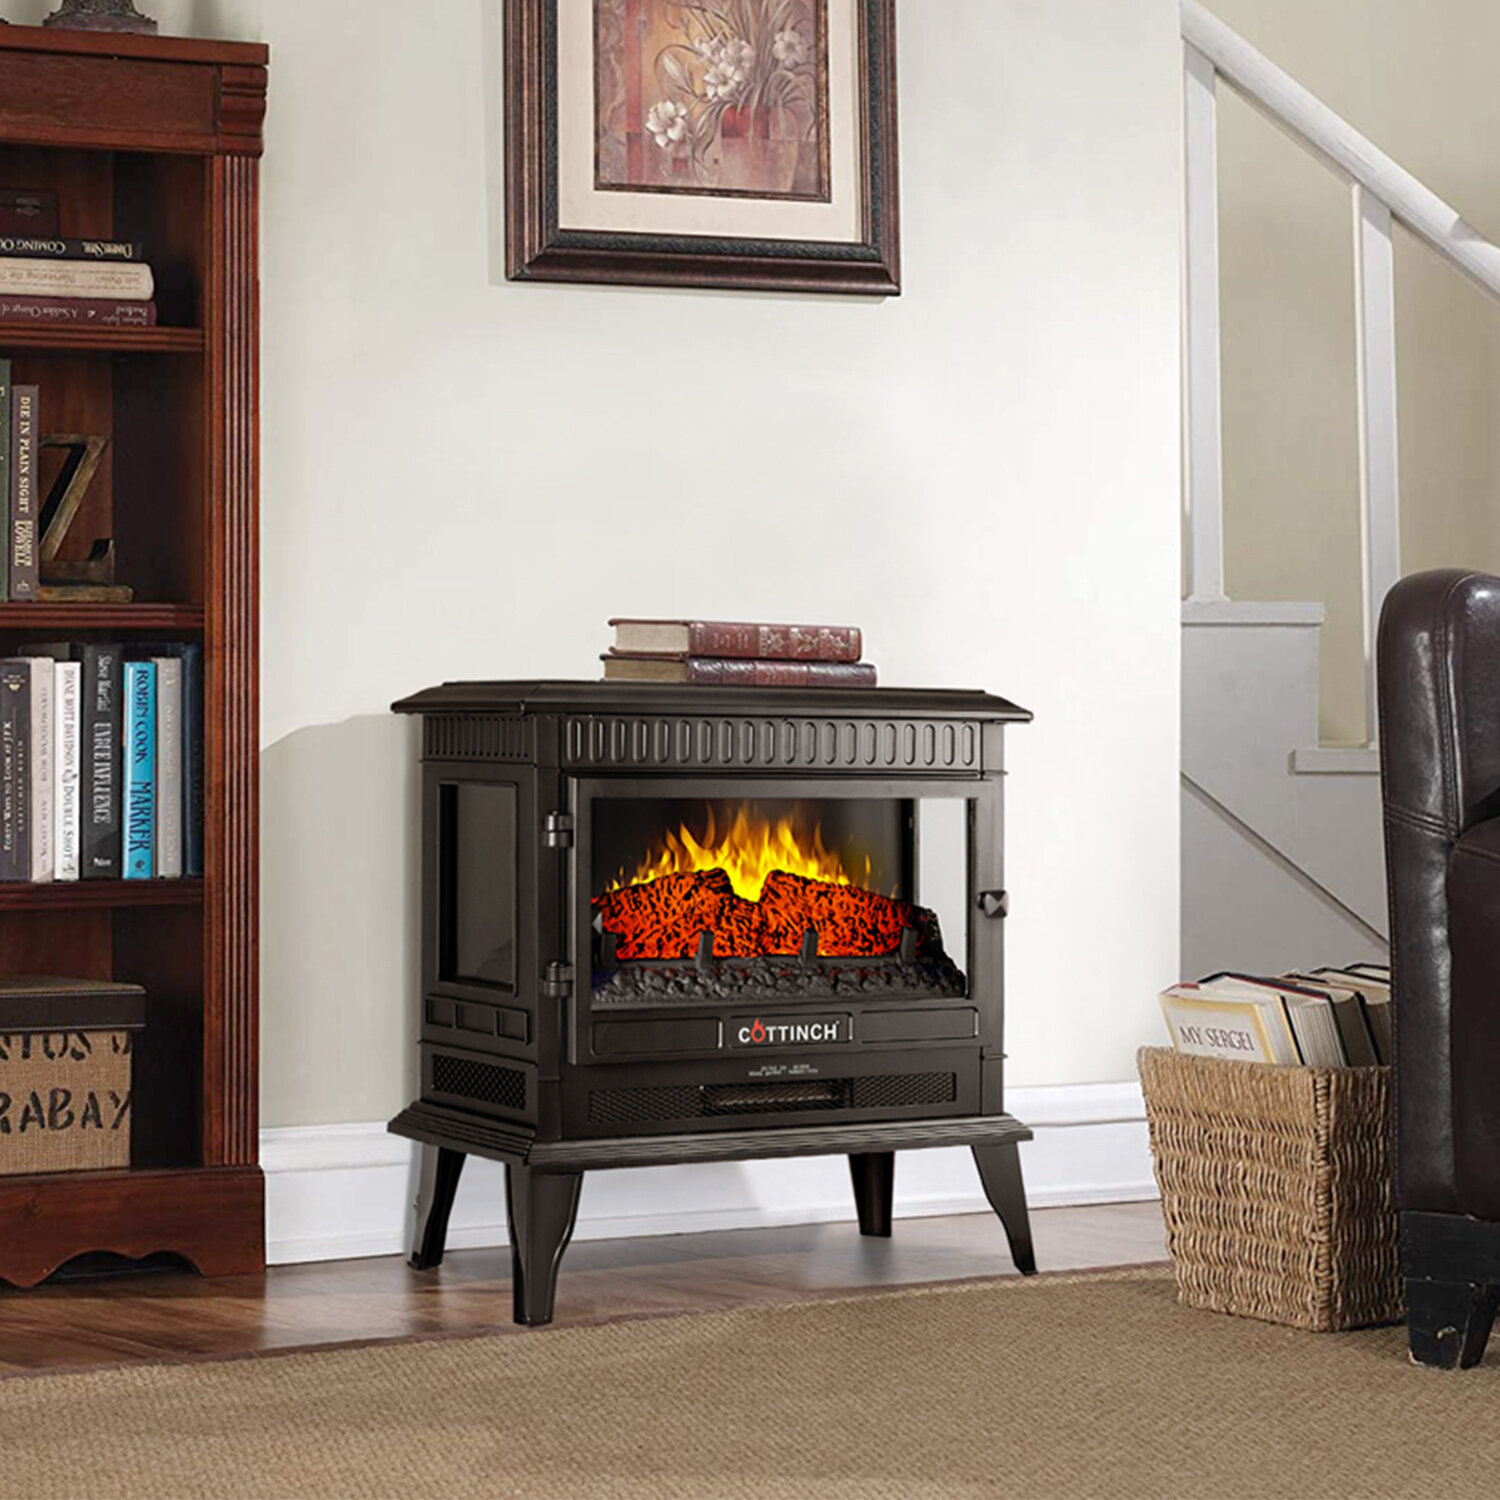 3 Side Fire Electric Fireplace Stove Freestanding Portable Indoor Space Heater 